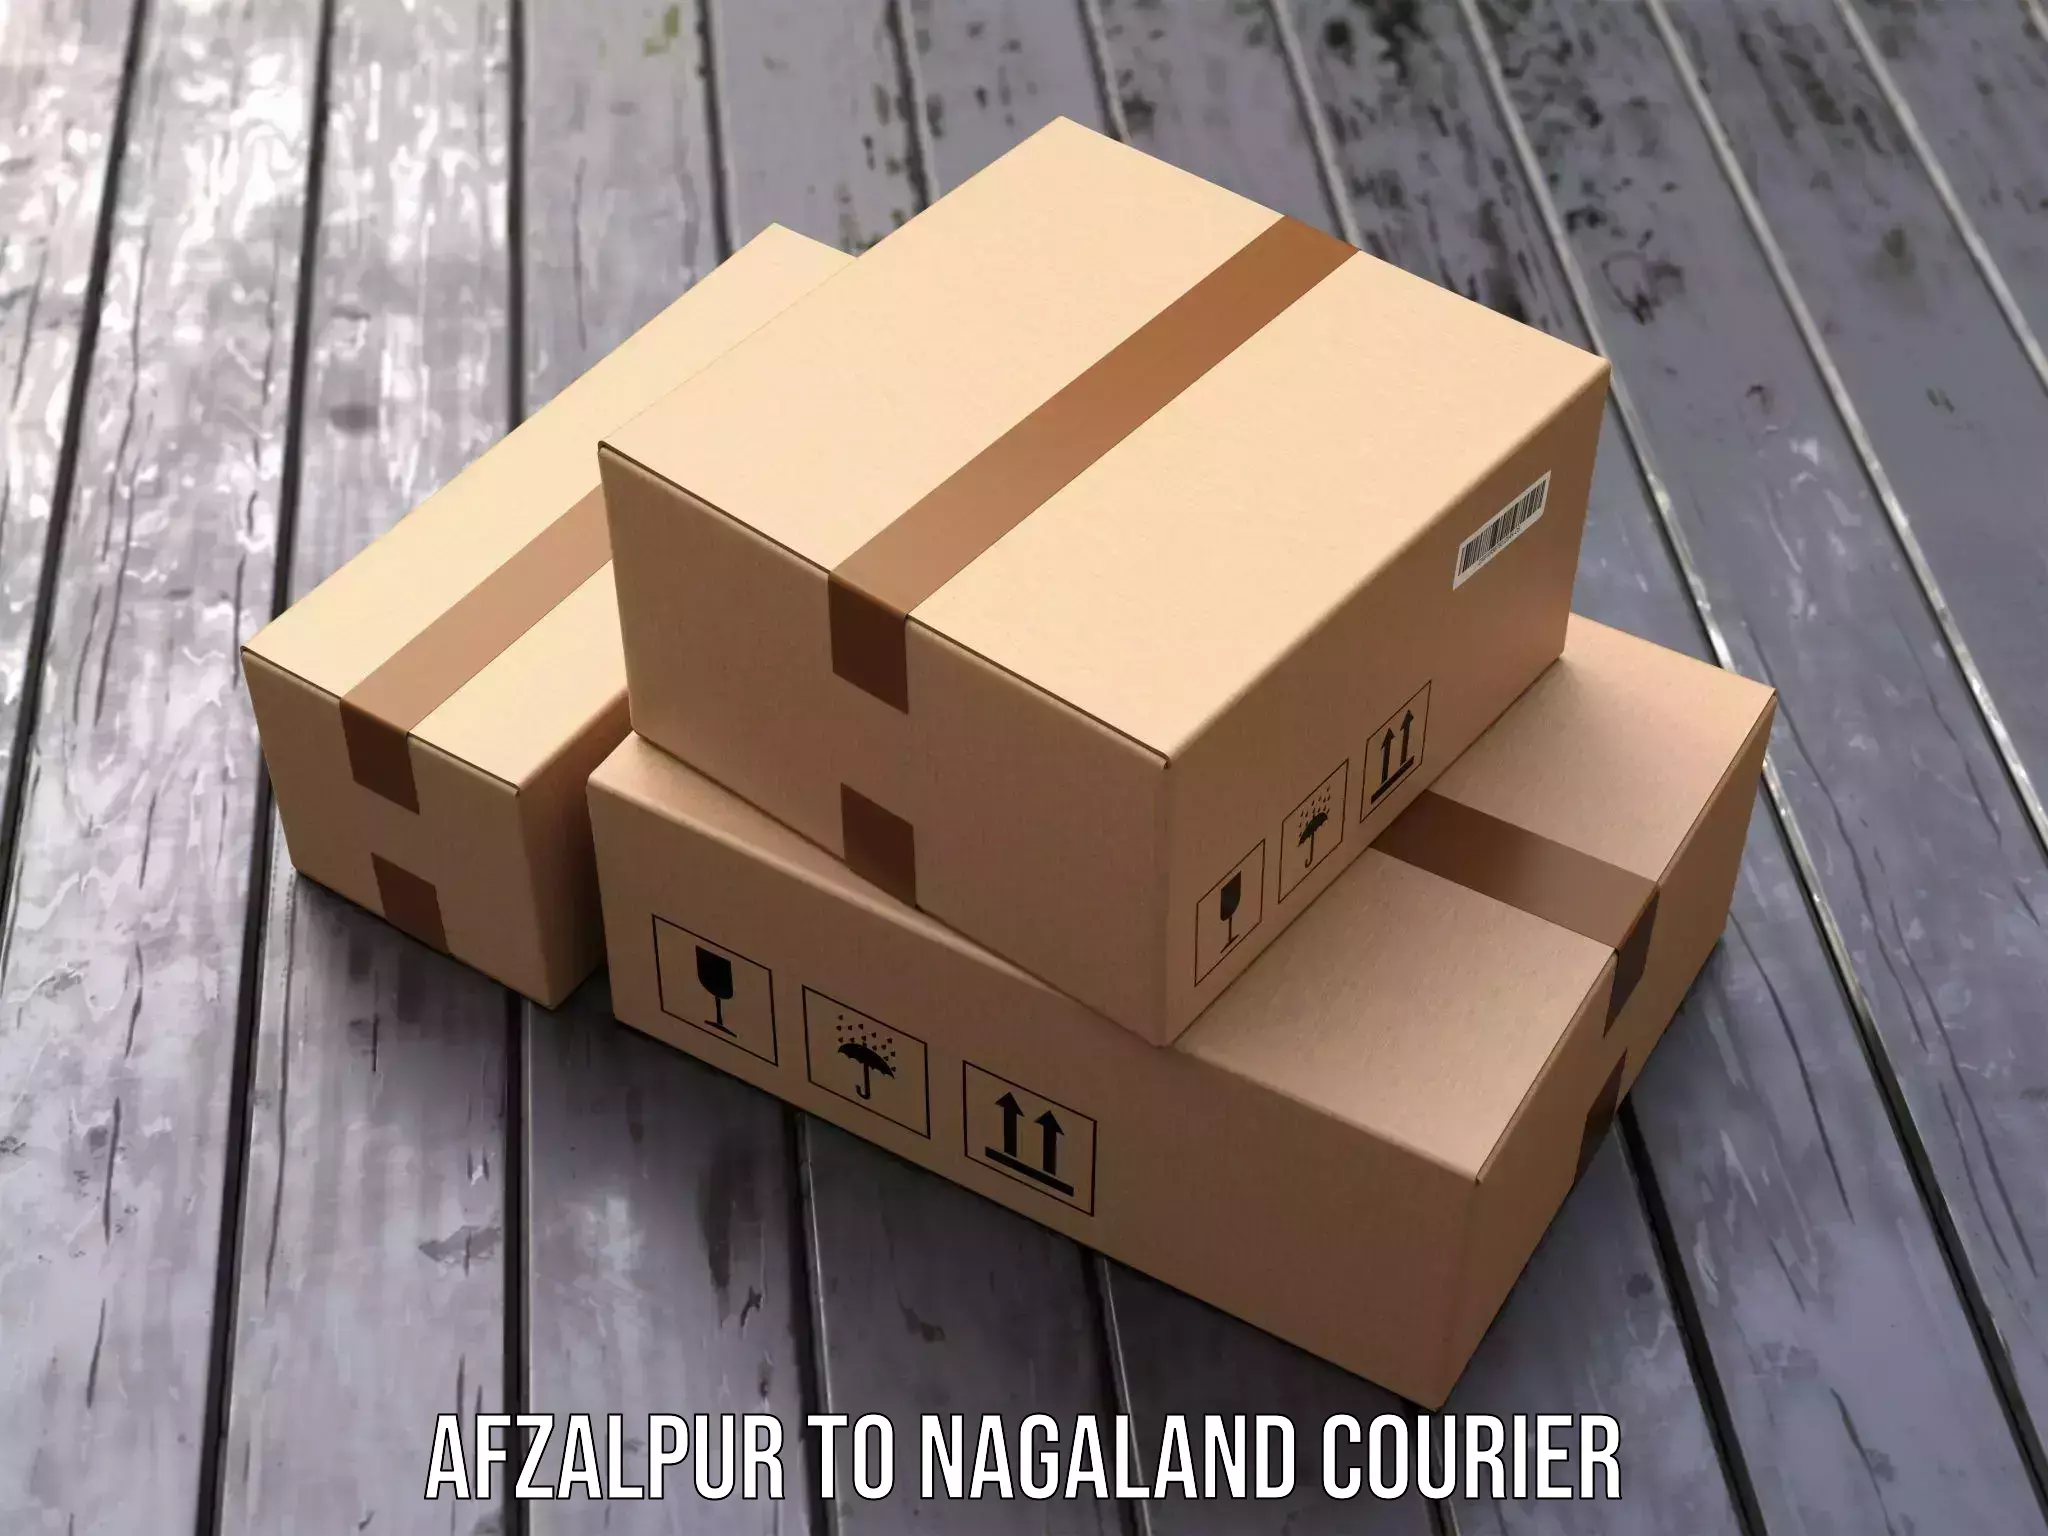 Global courier networks Afzalpur to Dimapur